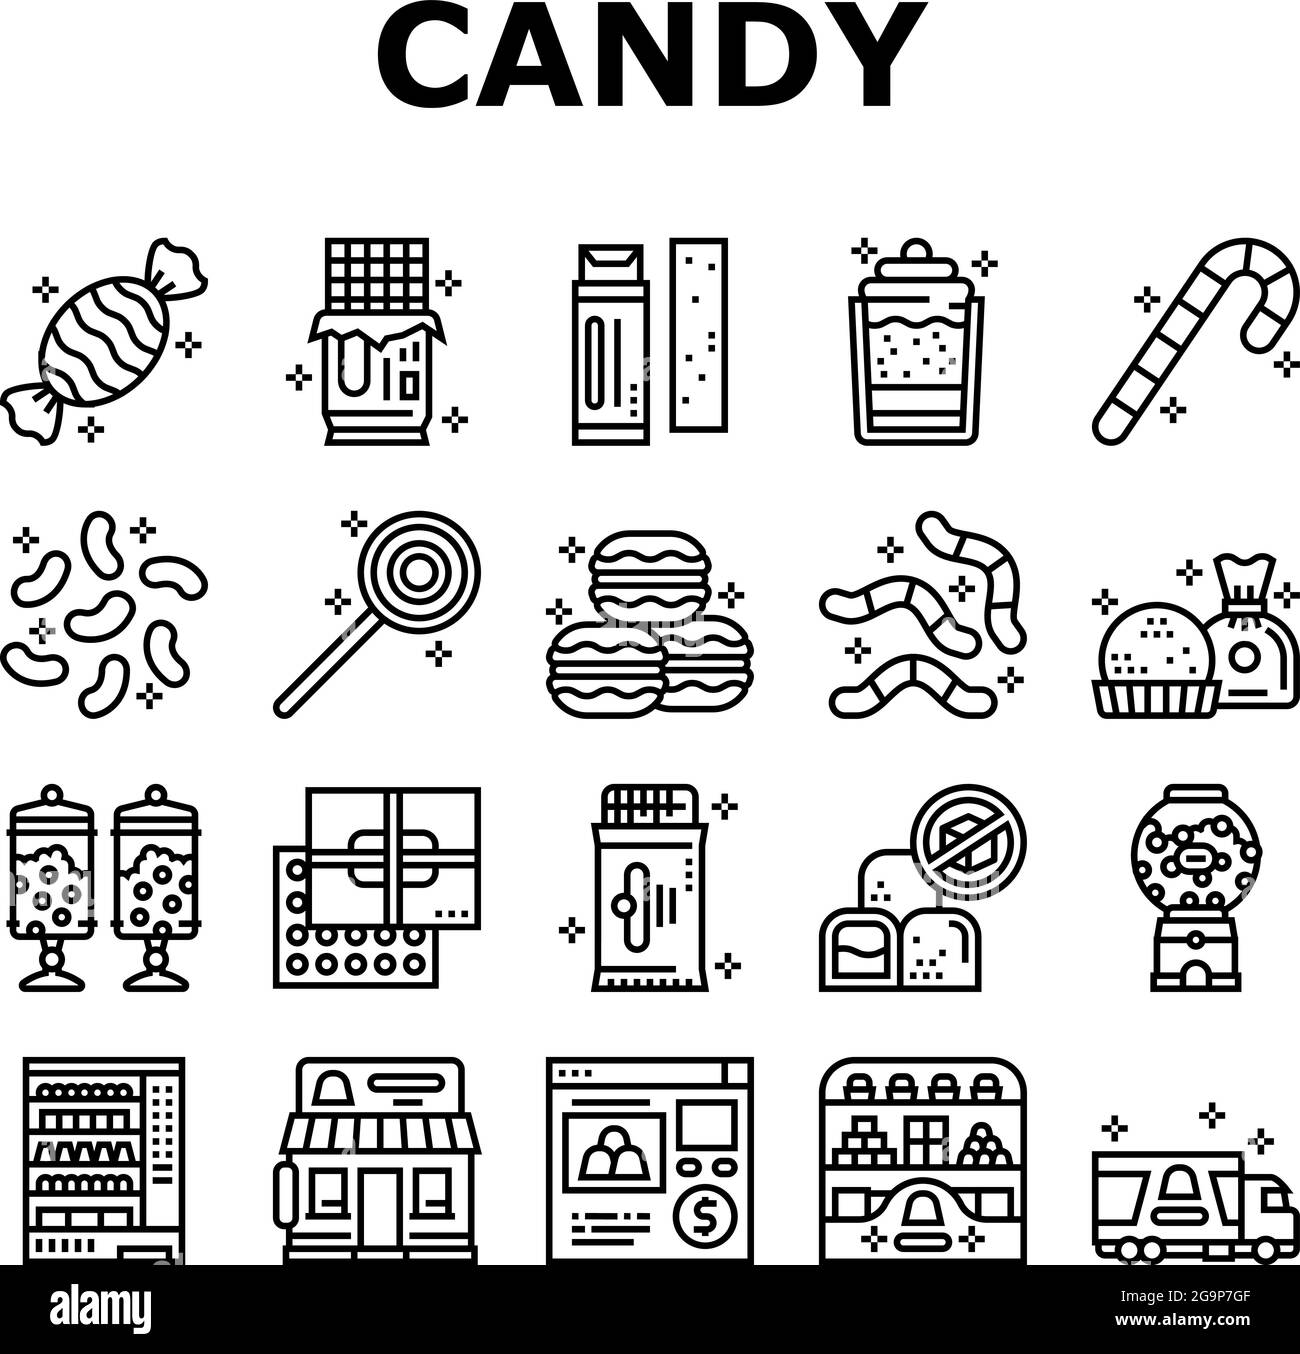 Candy Shop Product Collection Icons Set Vector Stock Vector